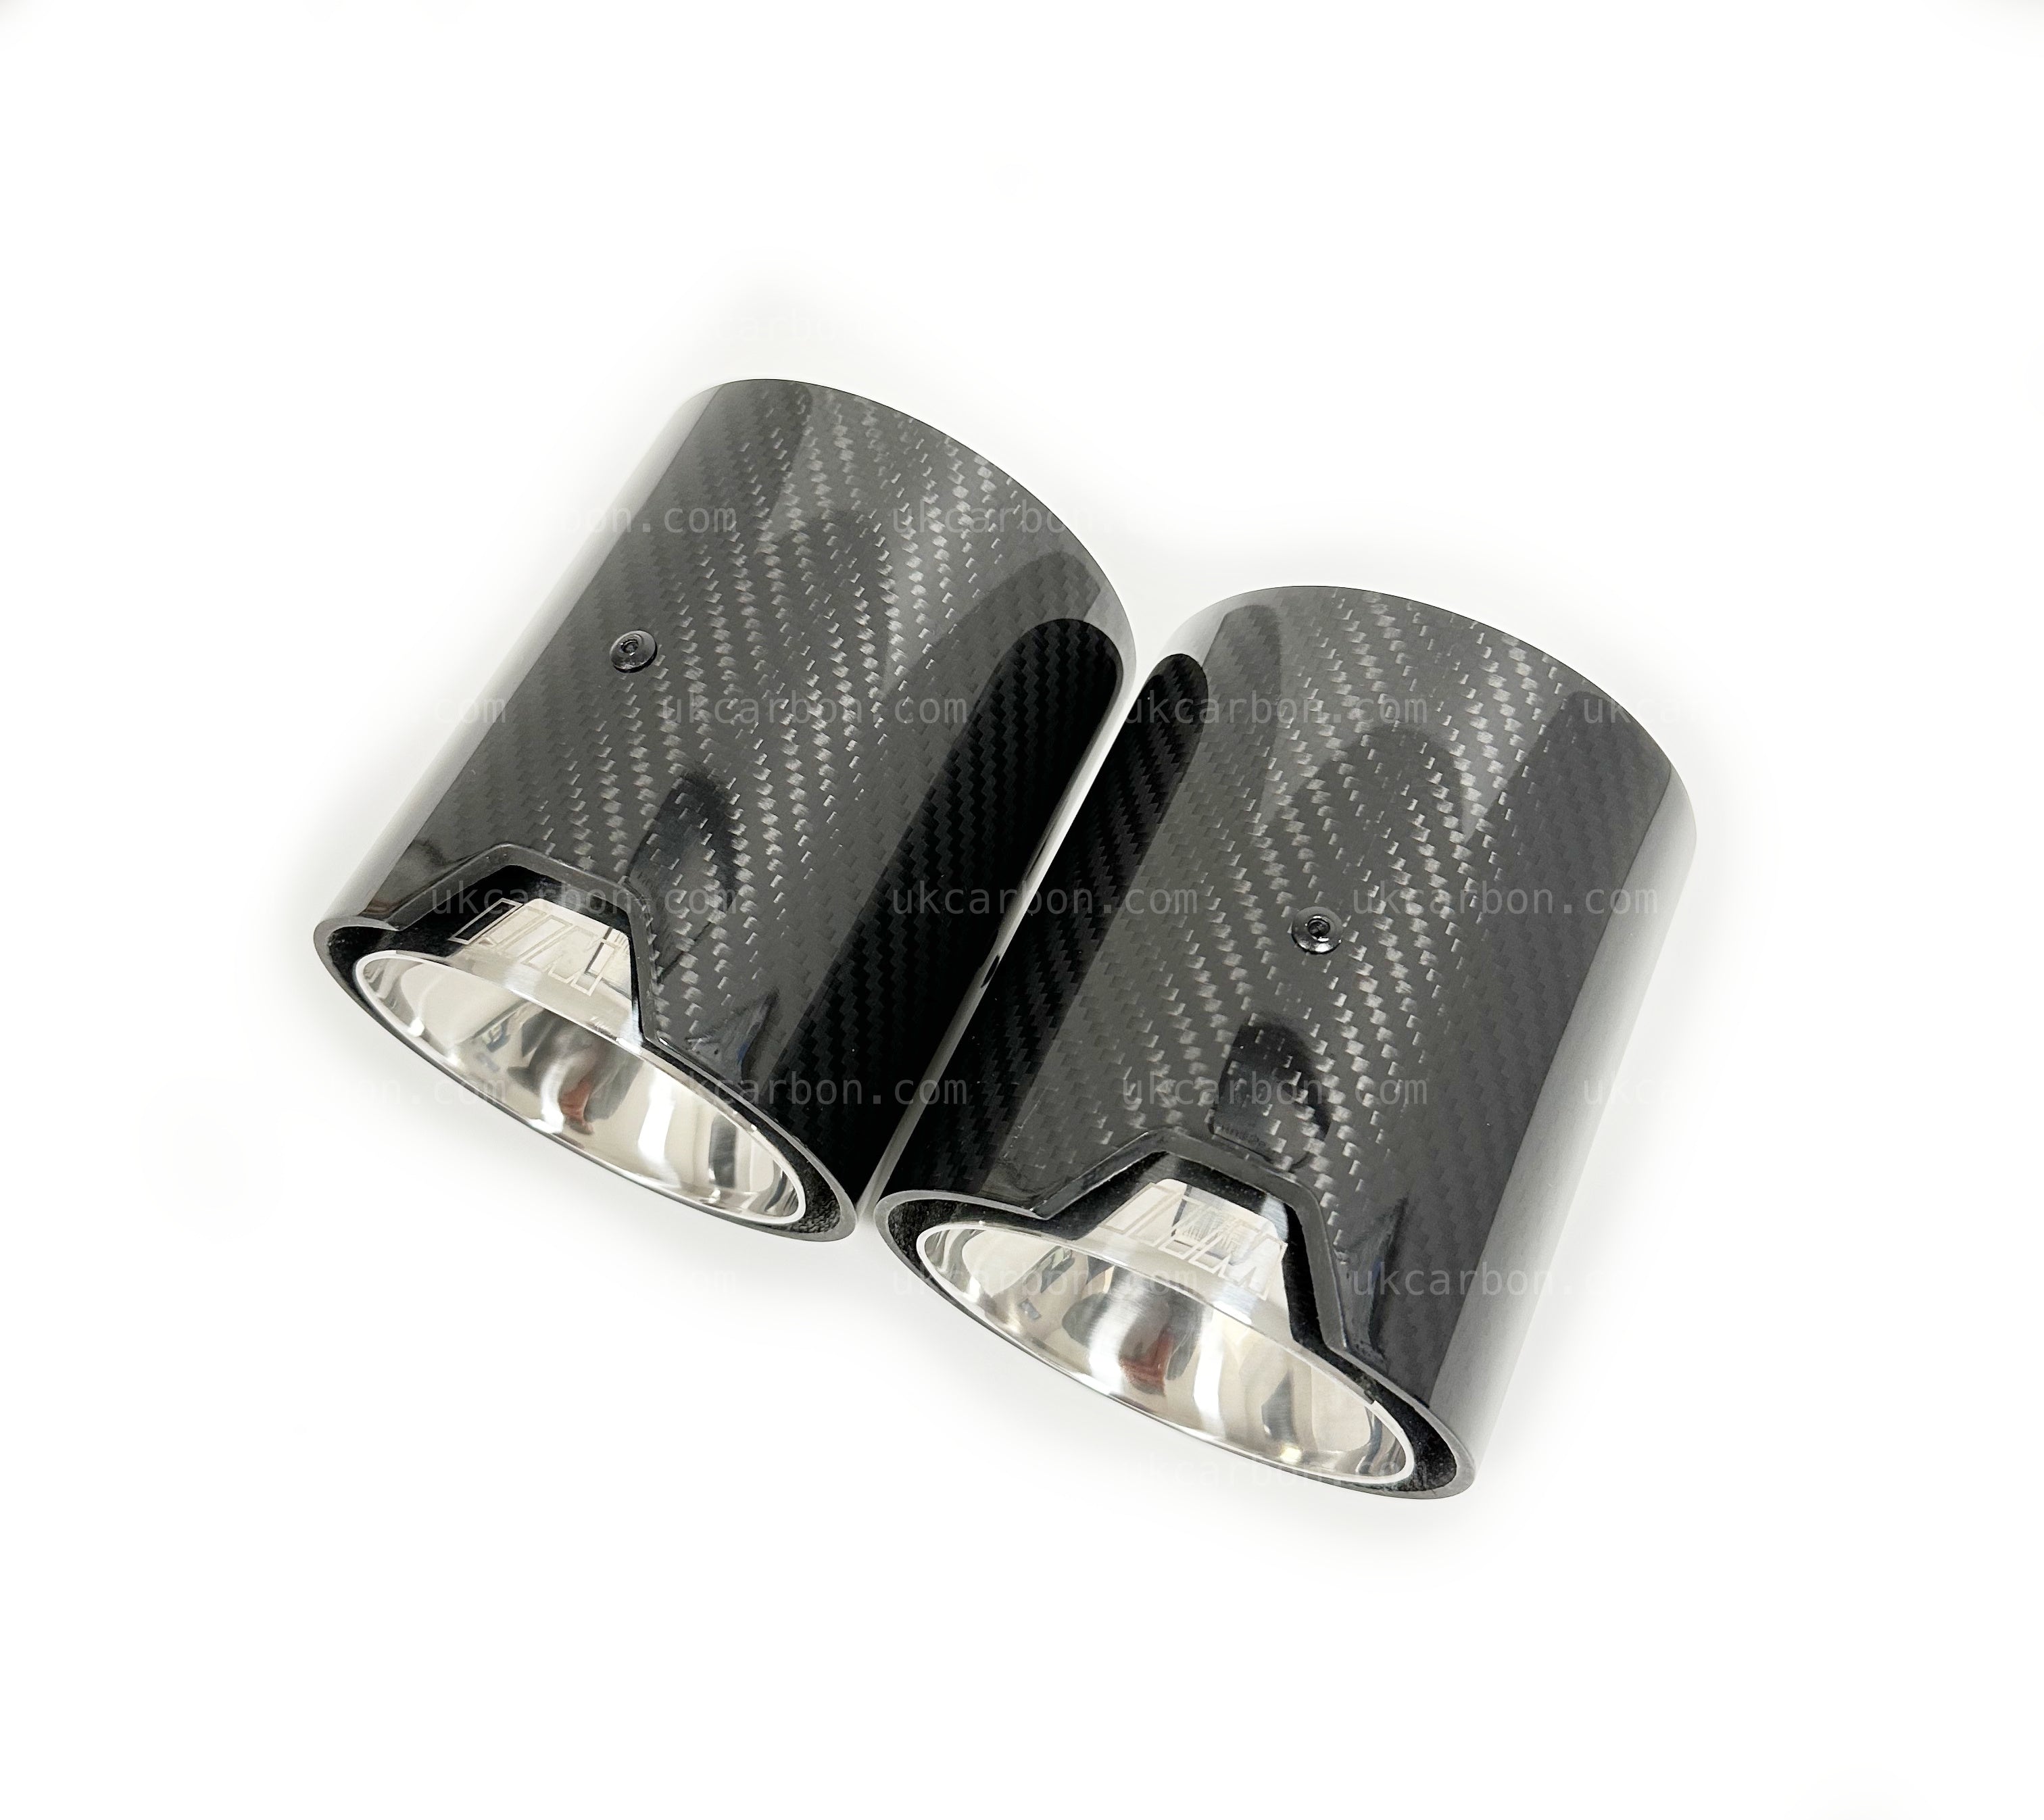 BMW M135i xDrive F40 Carbon Exhaust Tips M Performance Silver by UKCarbon